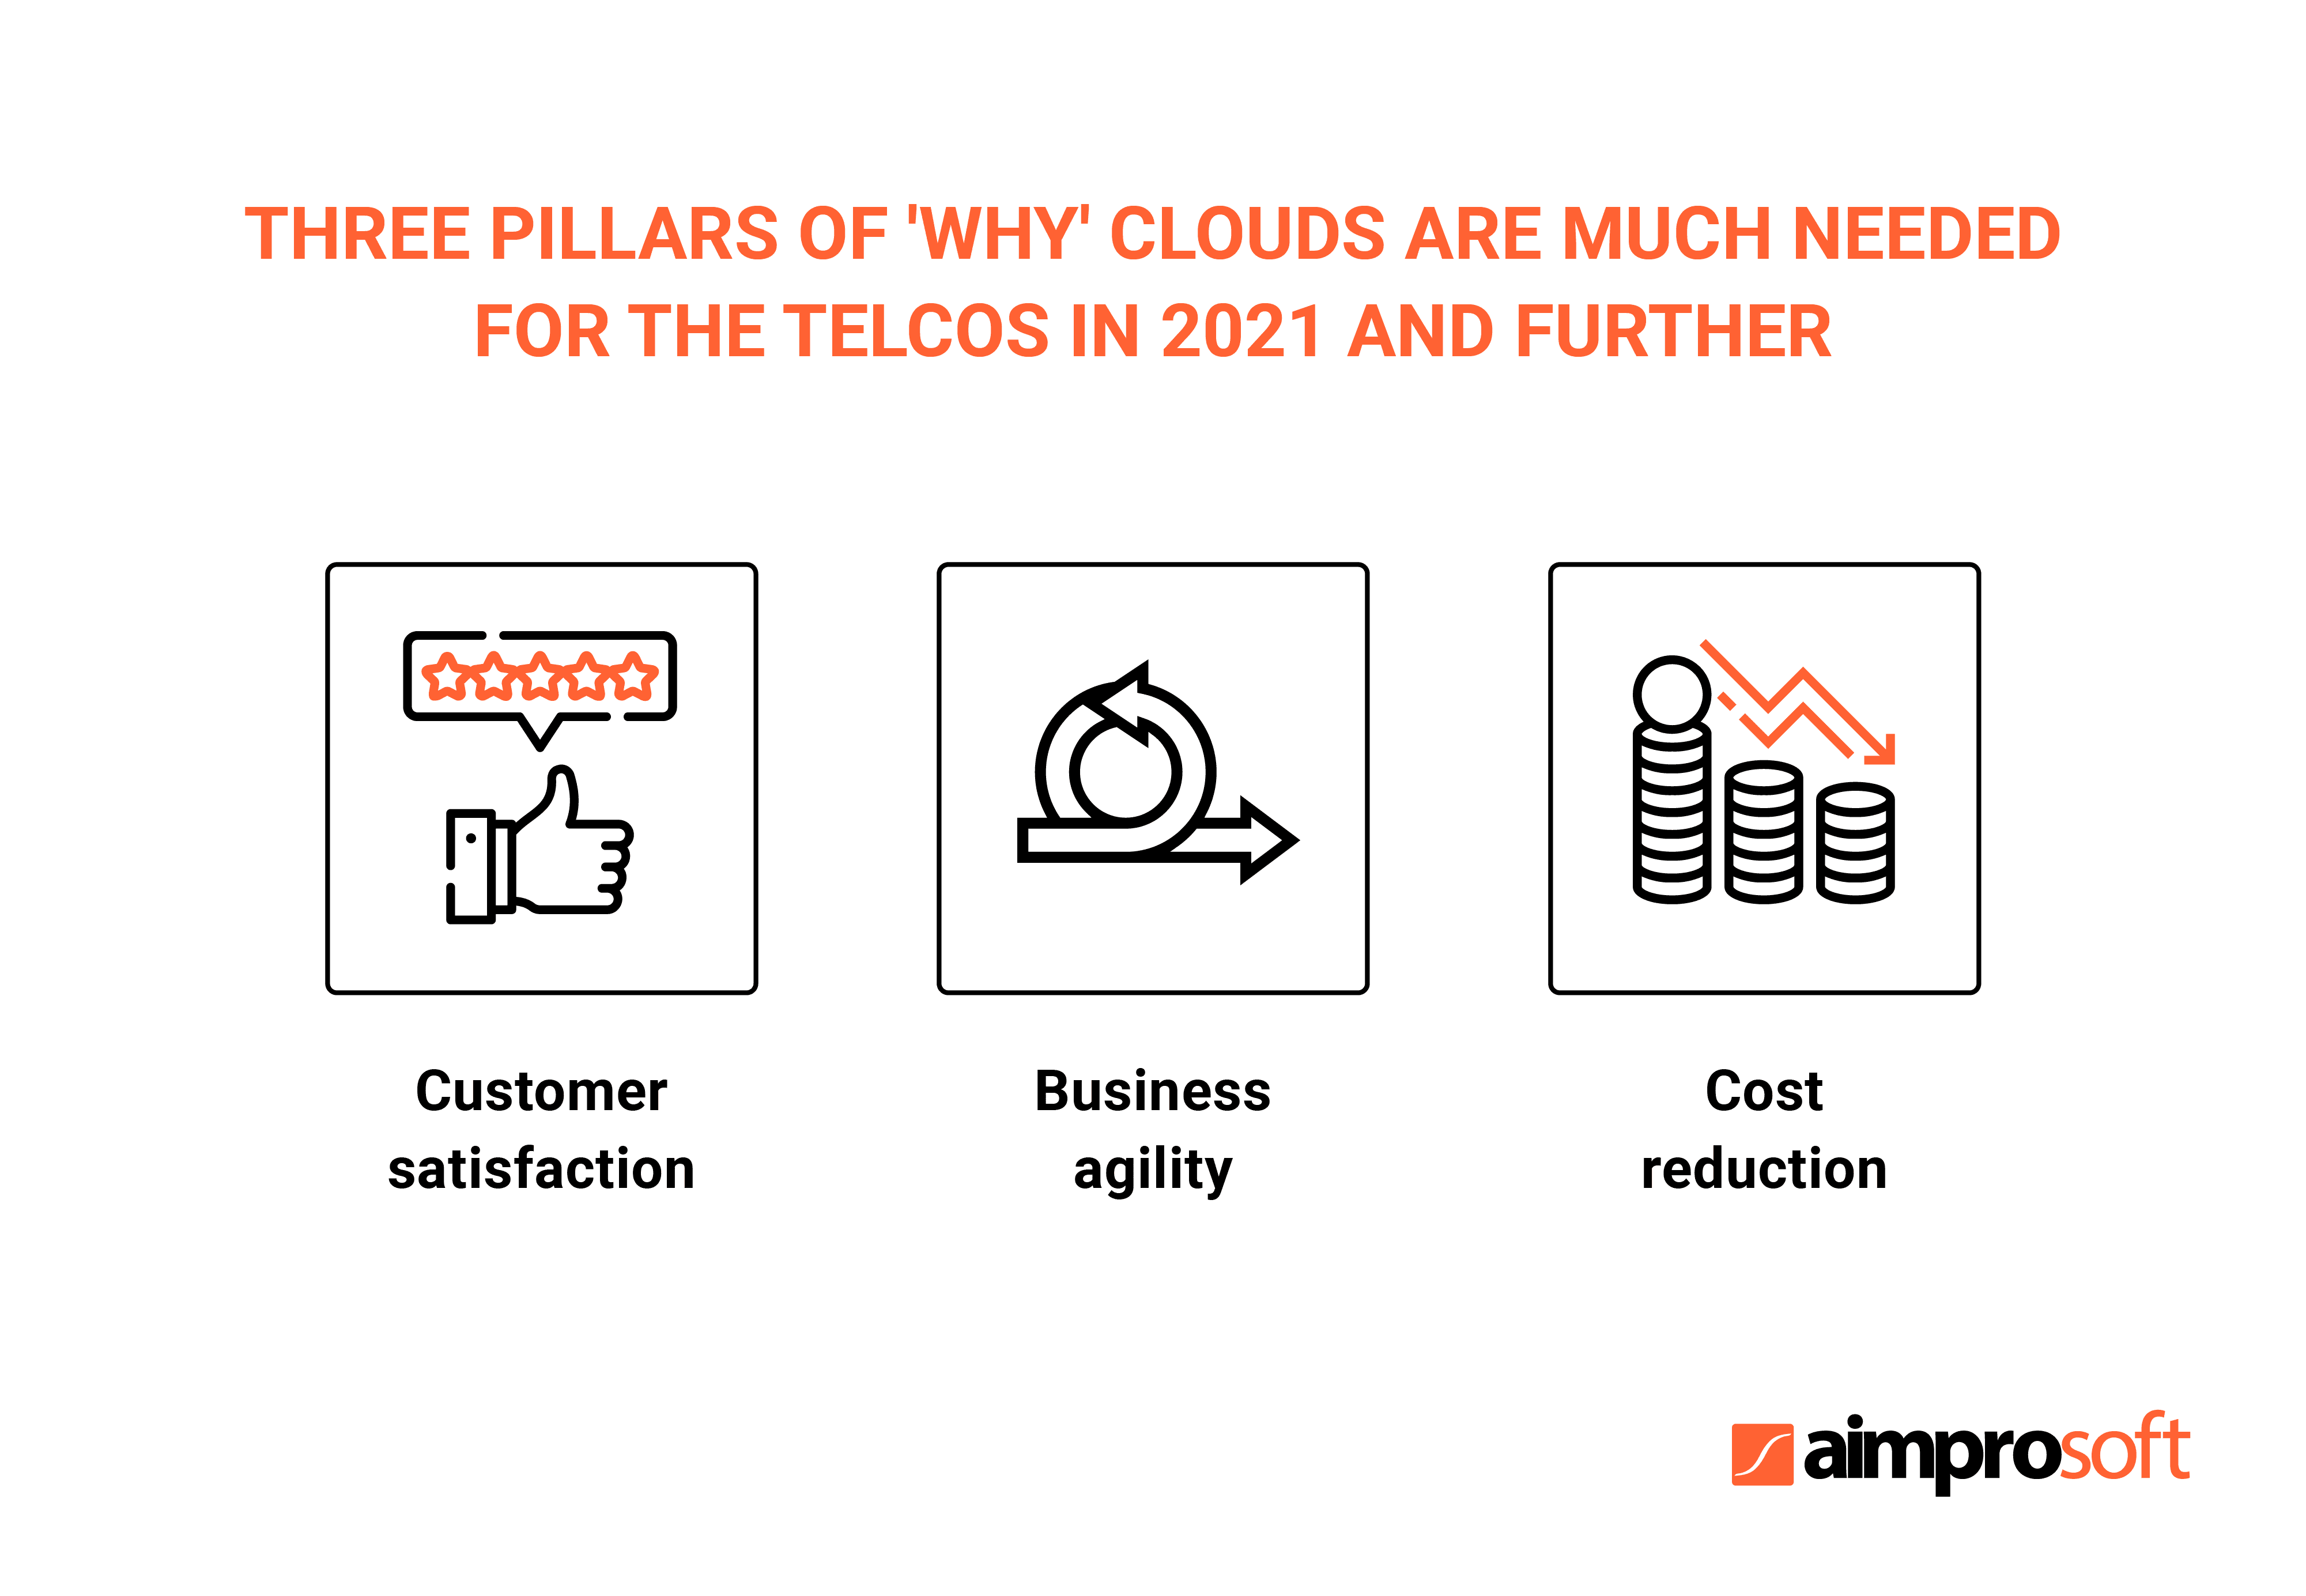 Benefits of cloud computing for telcomunications in 2021 and further